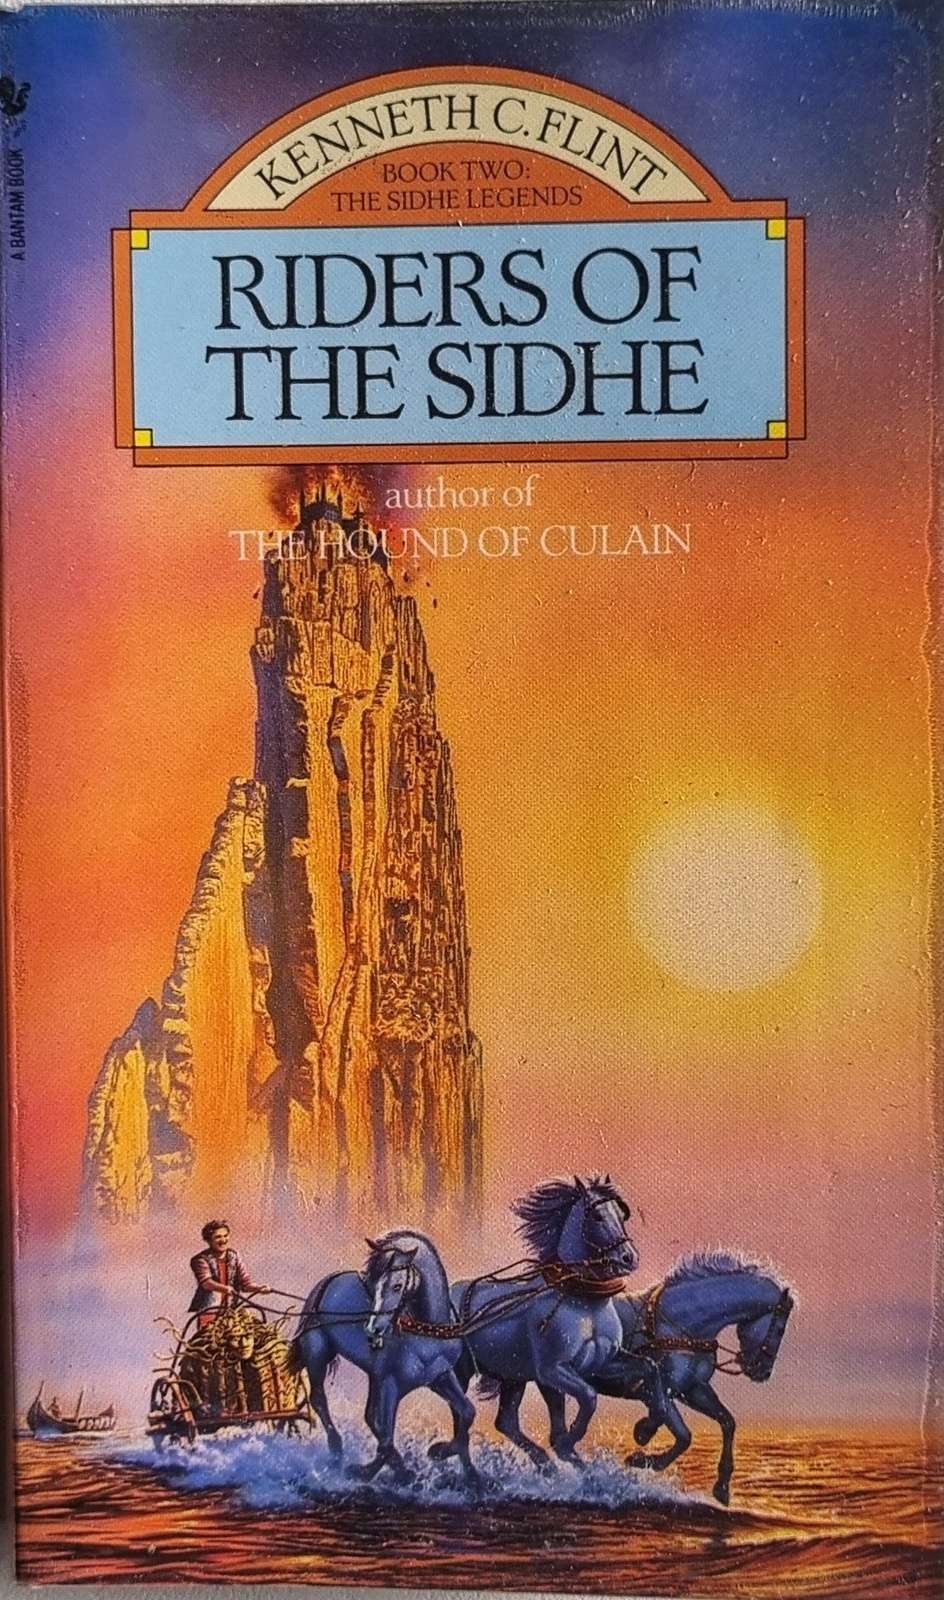 Riders of the Sidhe - Kenneth C. Flint Default Title